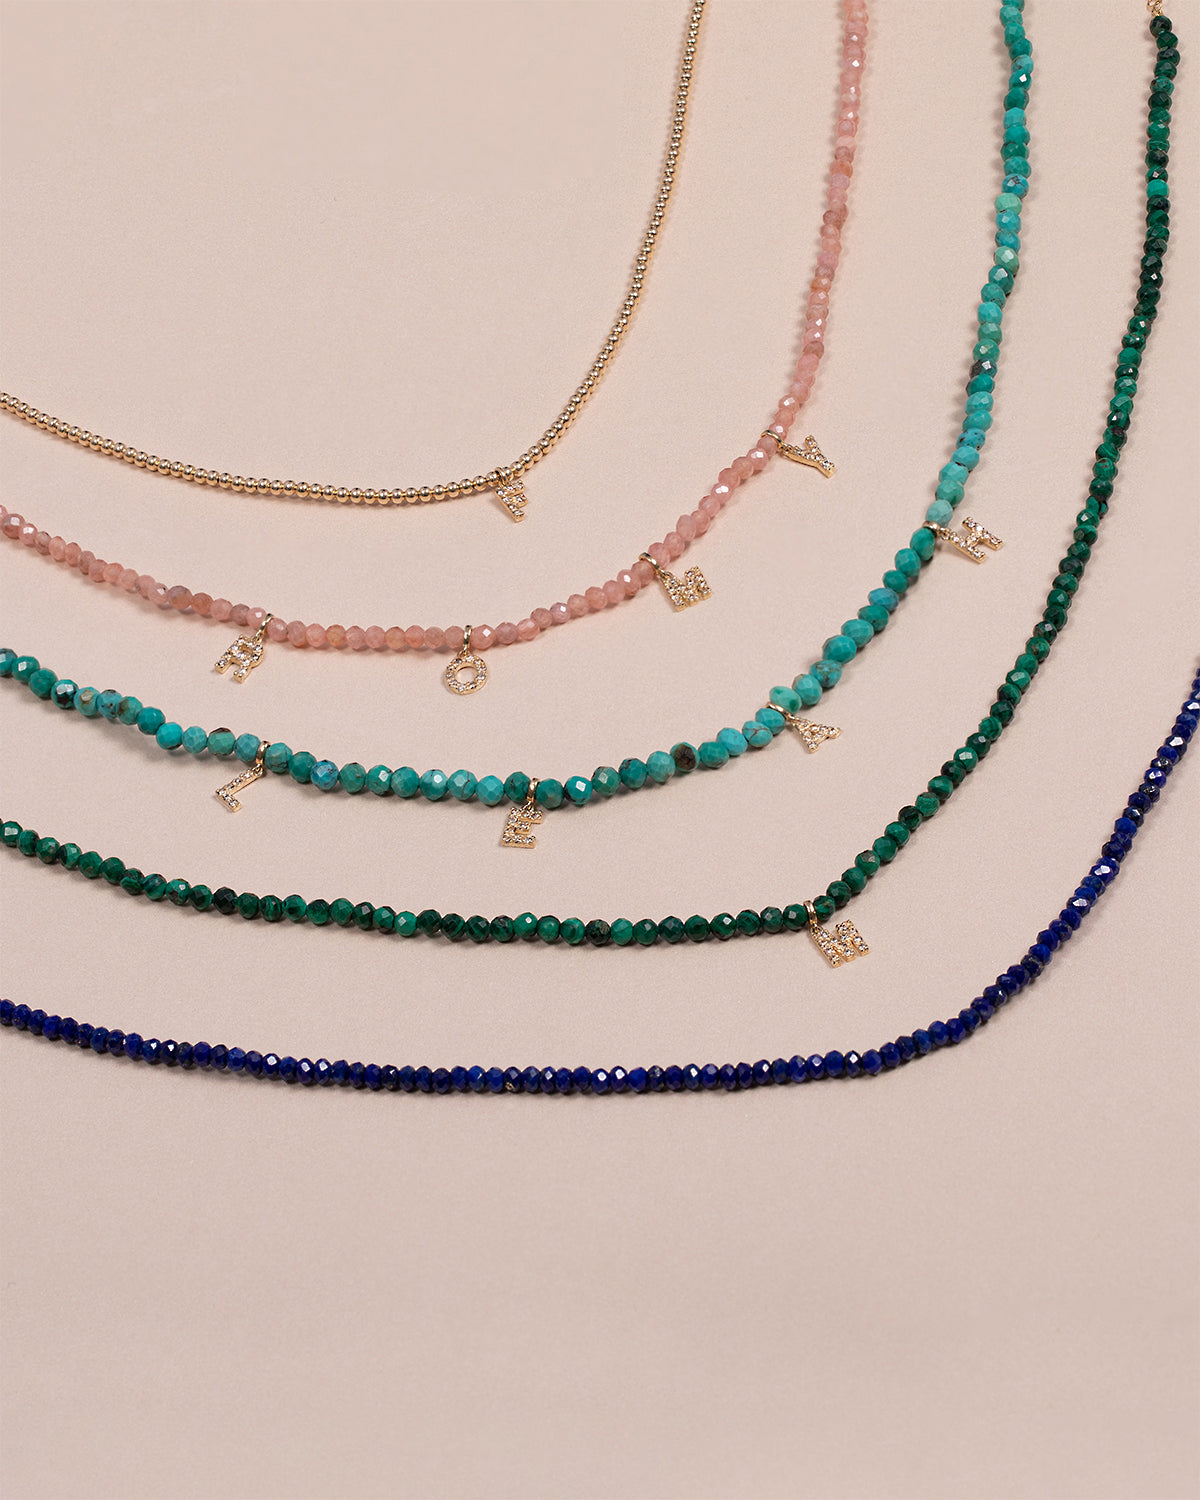 Zoe Lev Jewelry - Turquoise Beaded Necklace